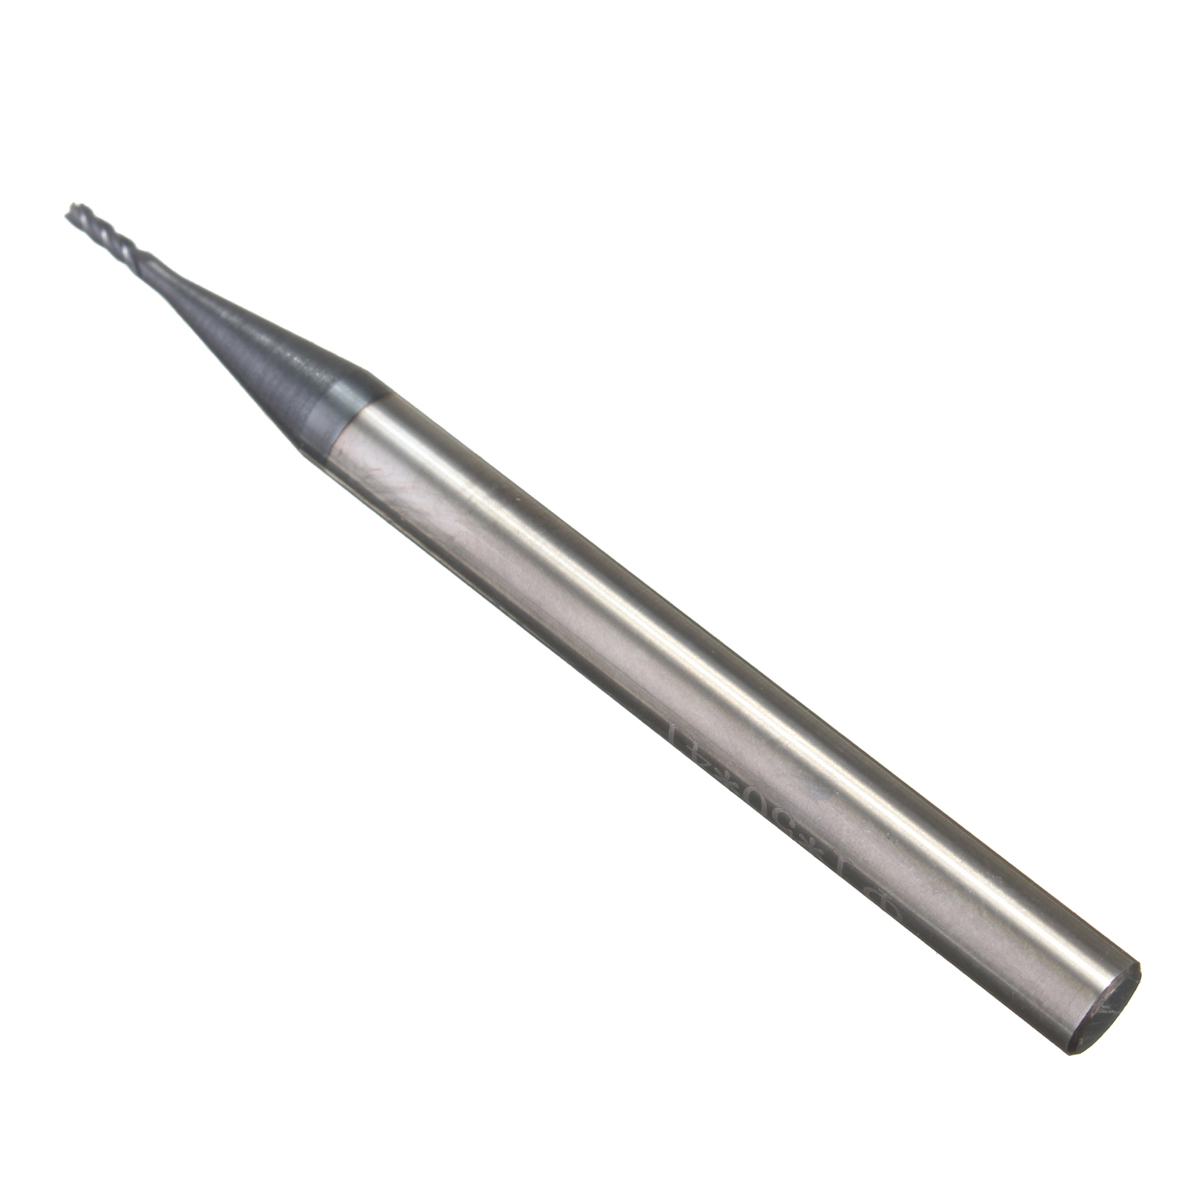 Drillpro-1mm-4-Flutes-End-Mill-Cutter-50mm-Length-Tungsten-Carbide-Milling-Cutter-CNC-Tool-1516233-7